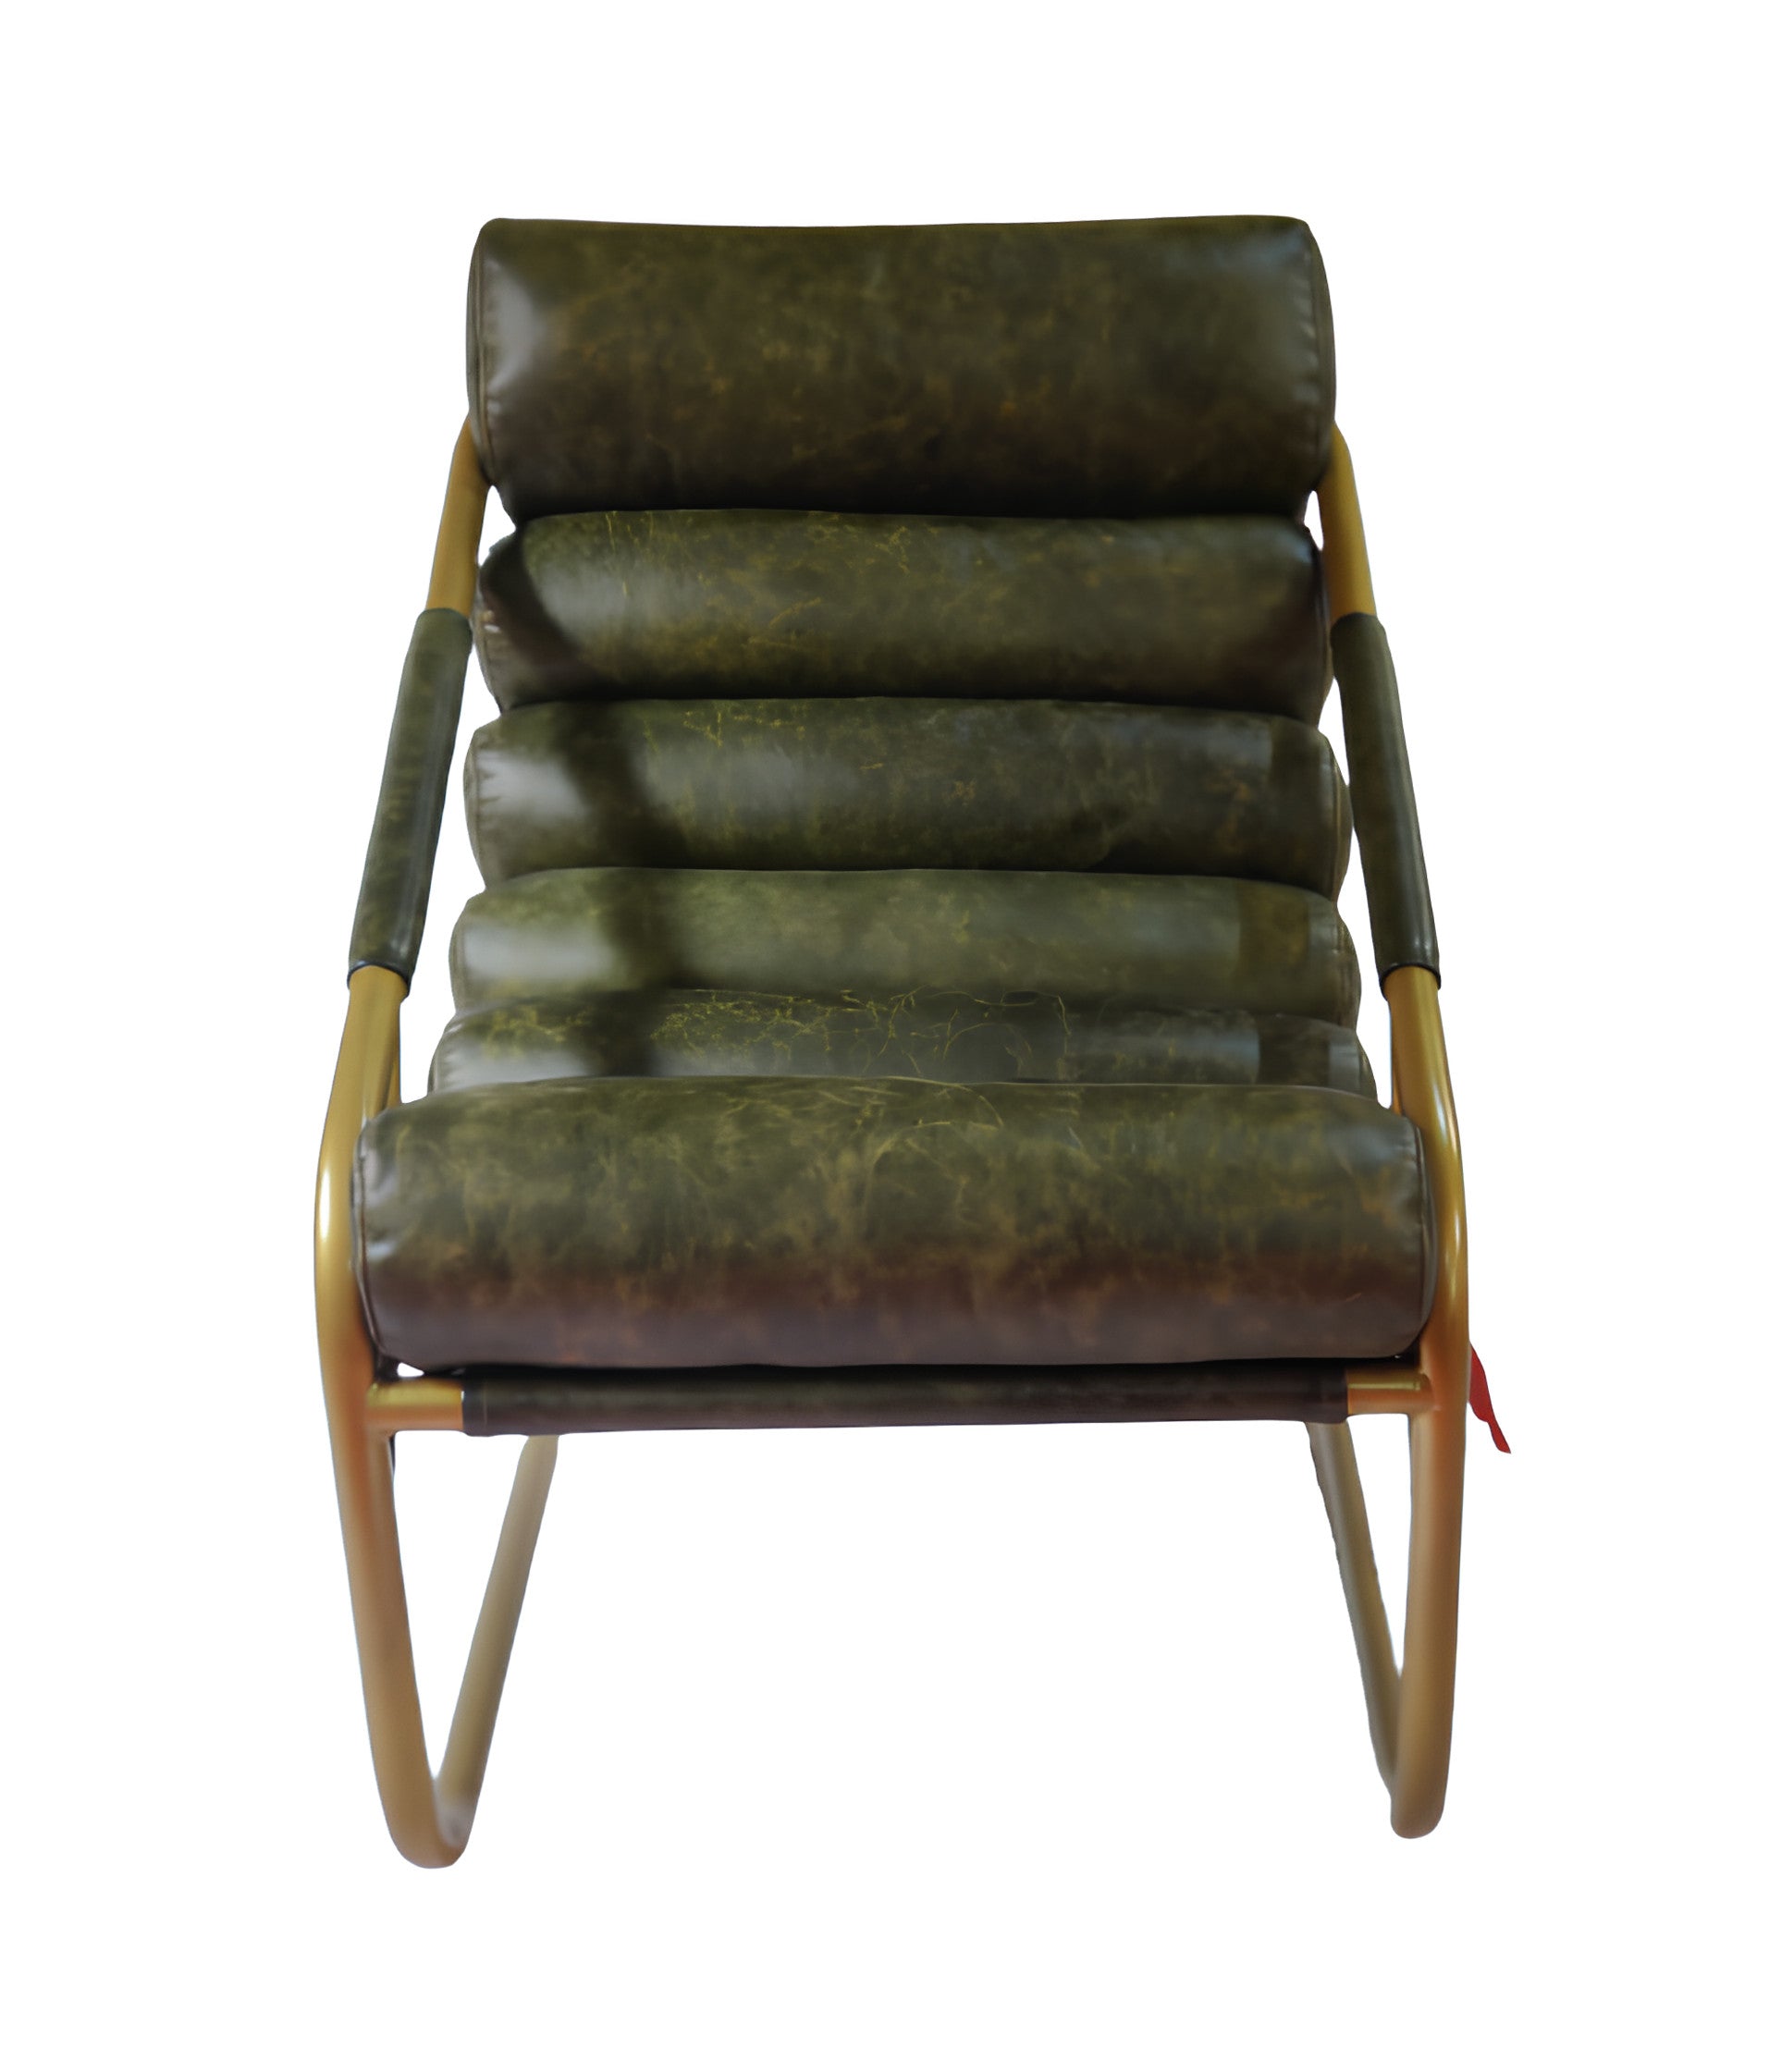 25" Green And Gold Top Grain Leather Tufted Lounge Chair